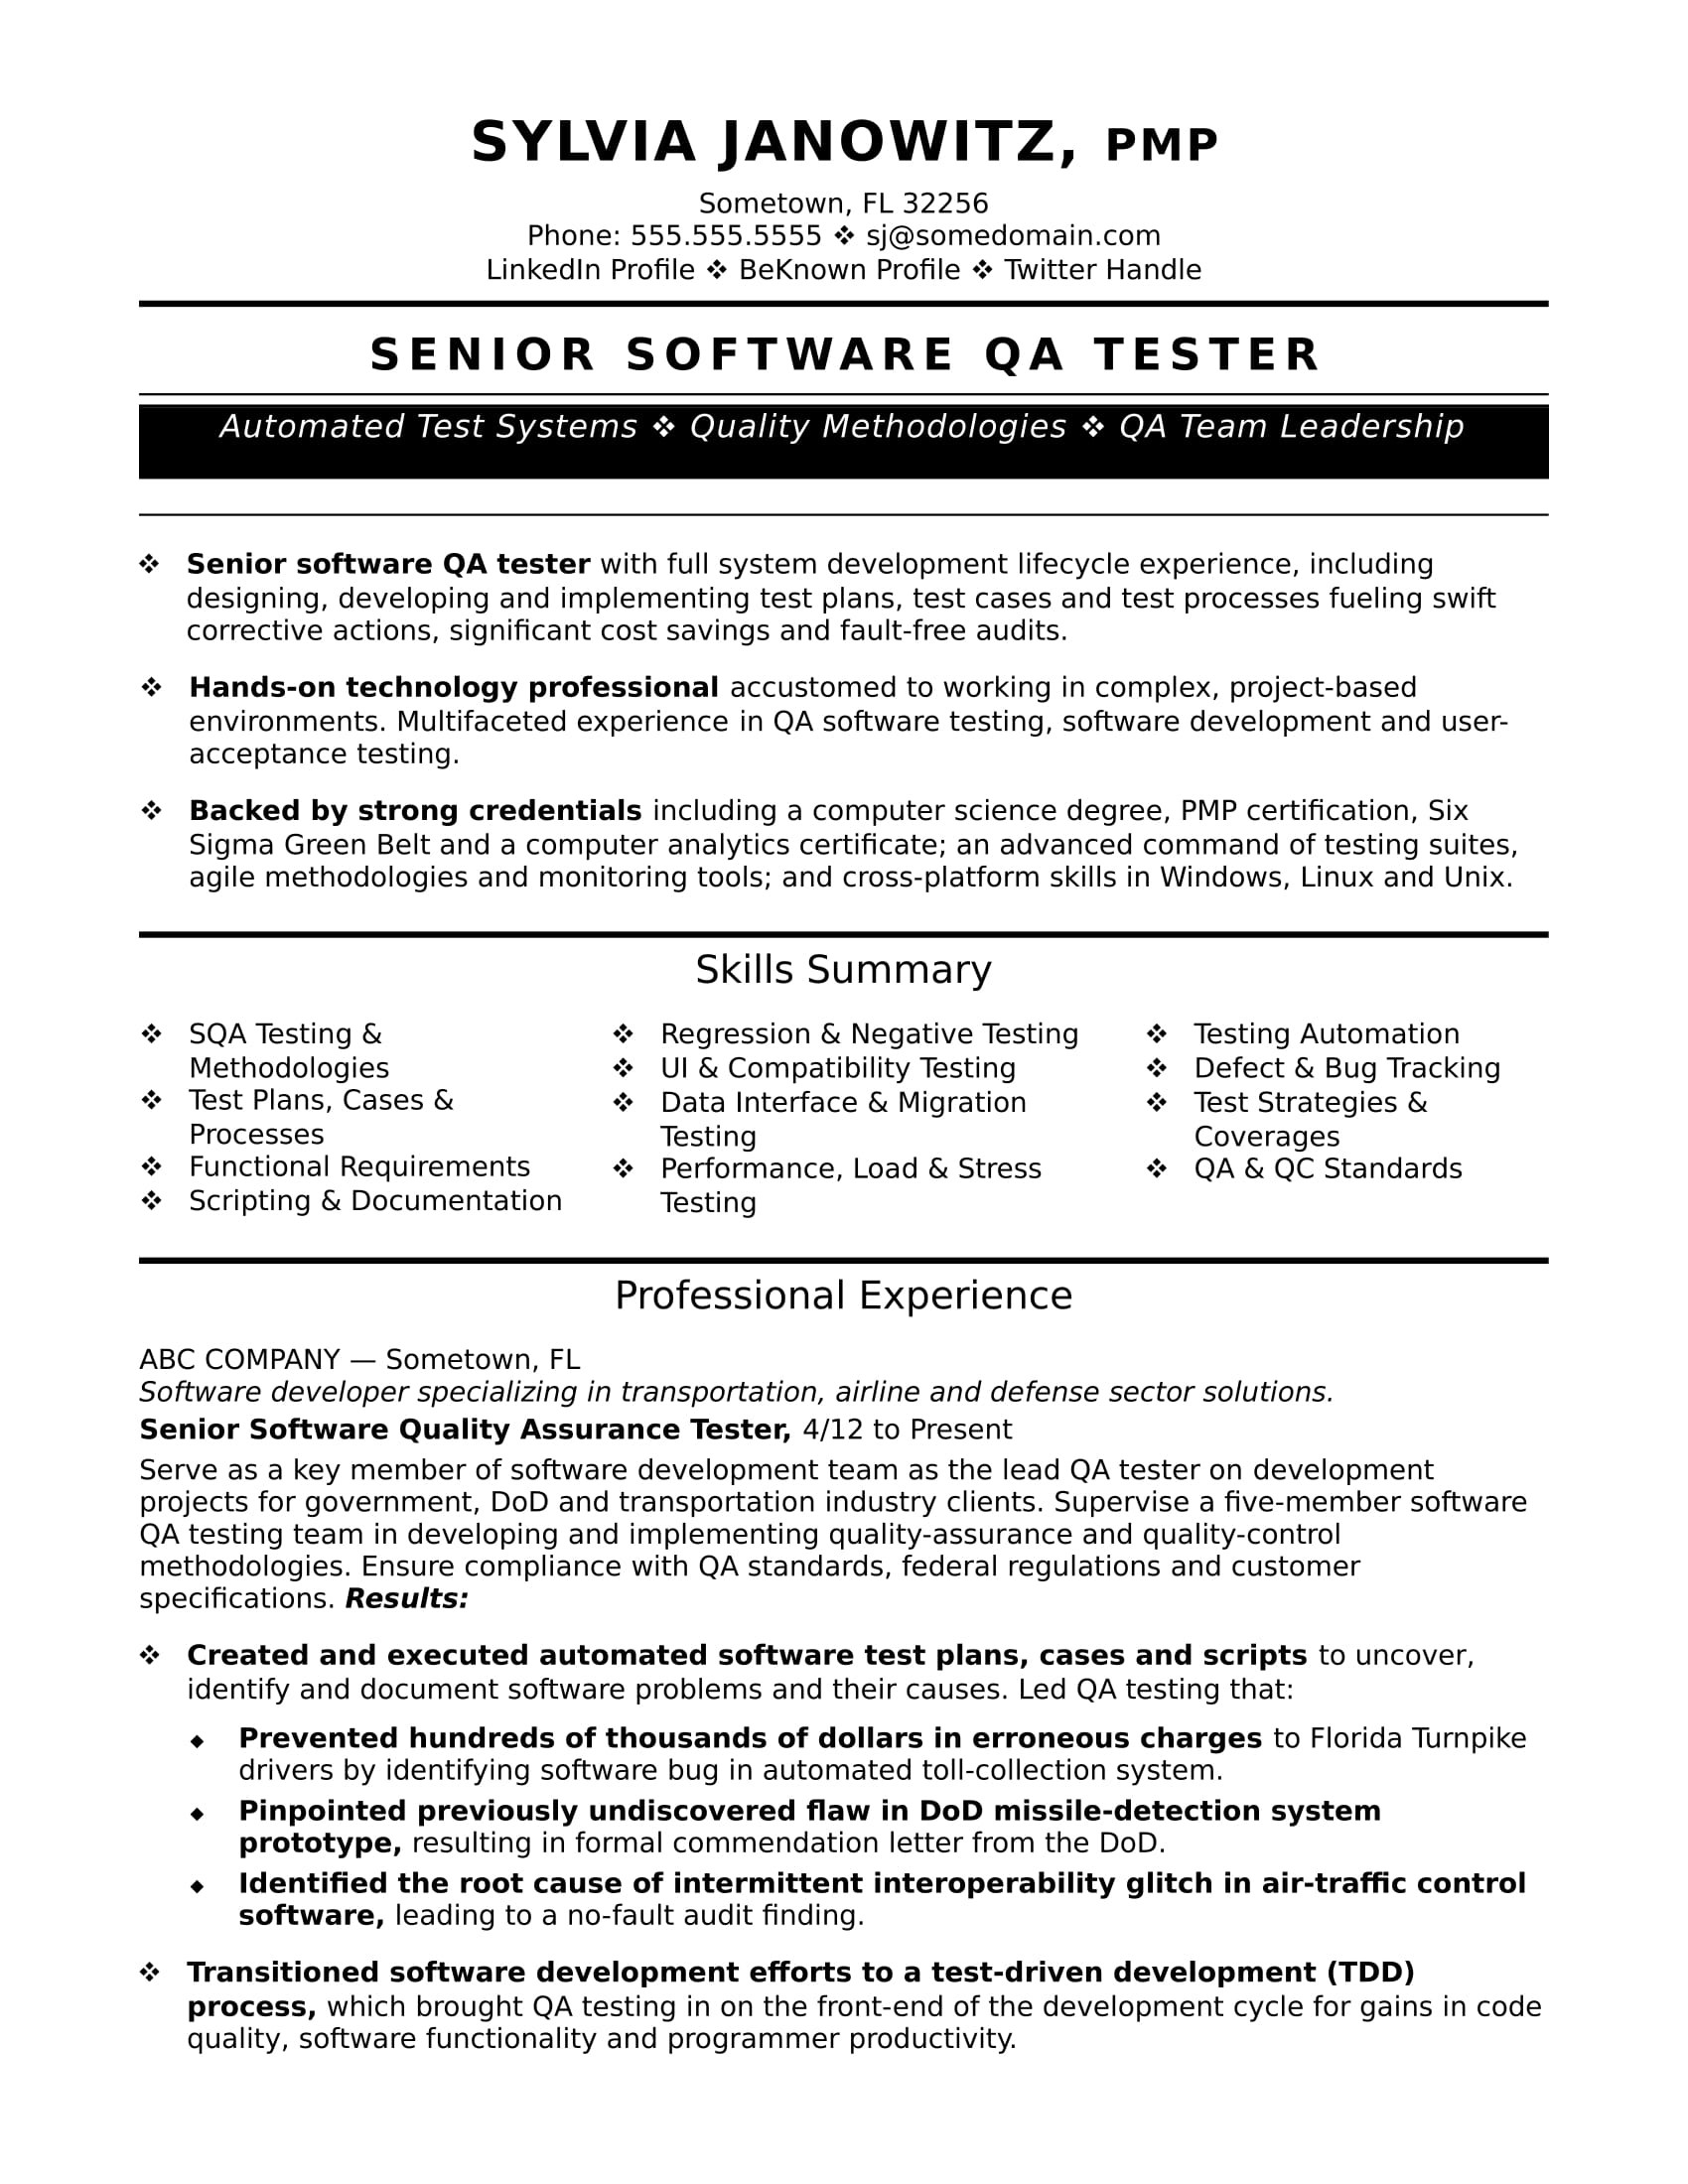 Sample software Testing Resume for 4 Experienced Experienced Qa software Tester Resume Sample Monster.com